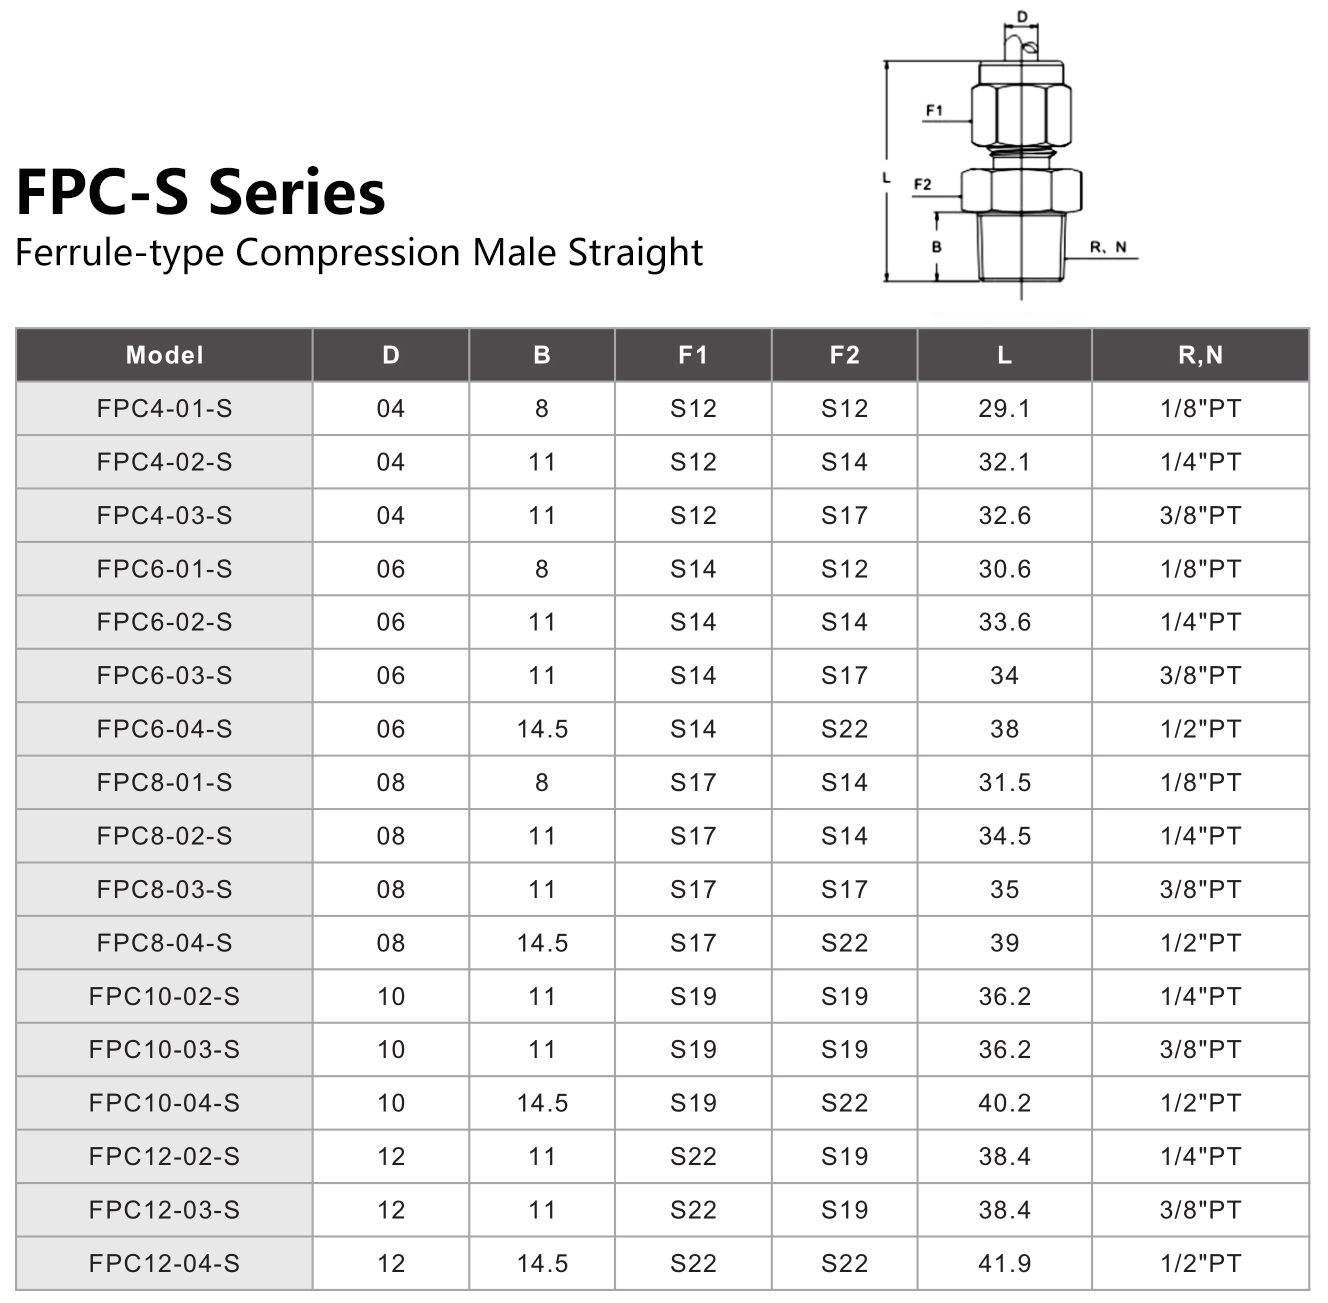 FPC-S Series Ferrule-type Compression Male Straight